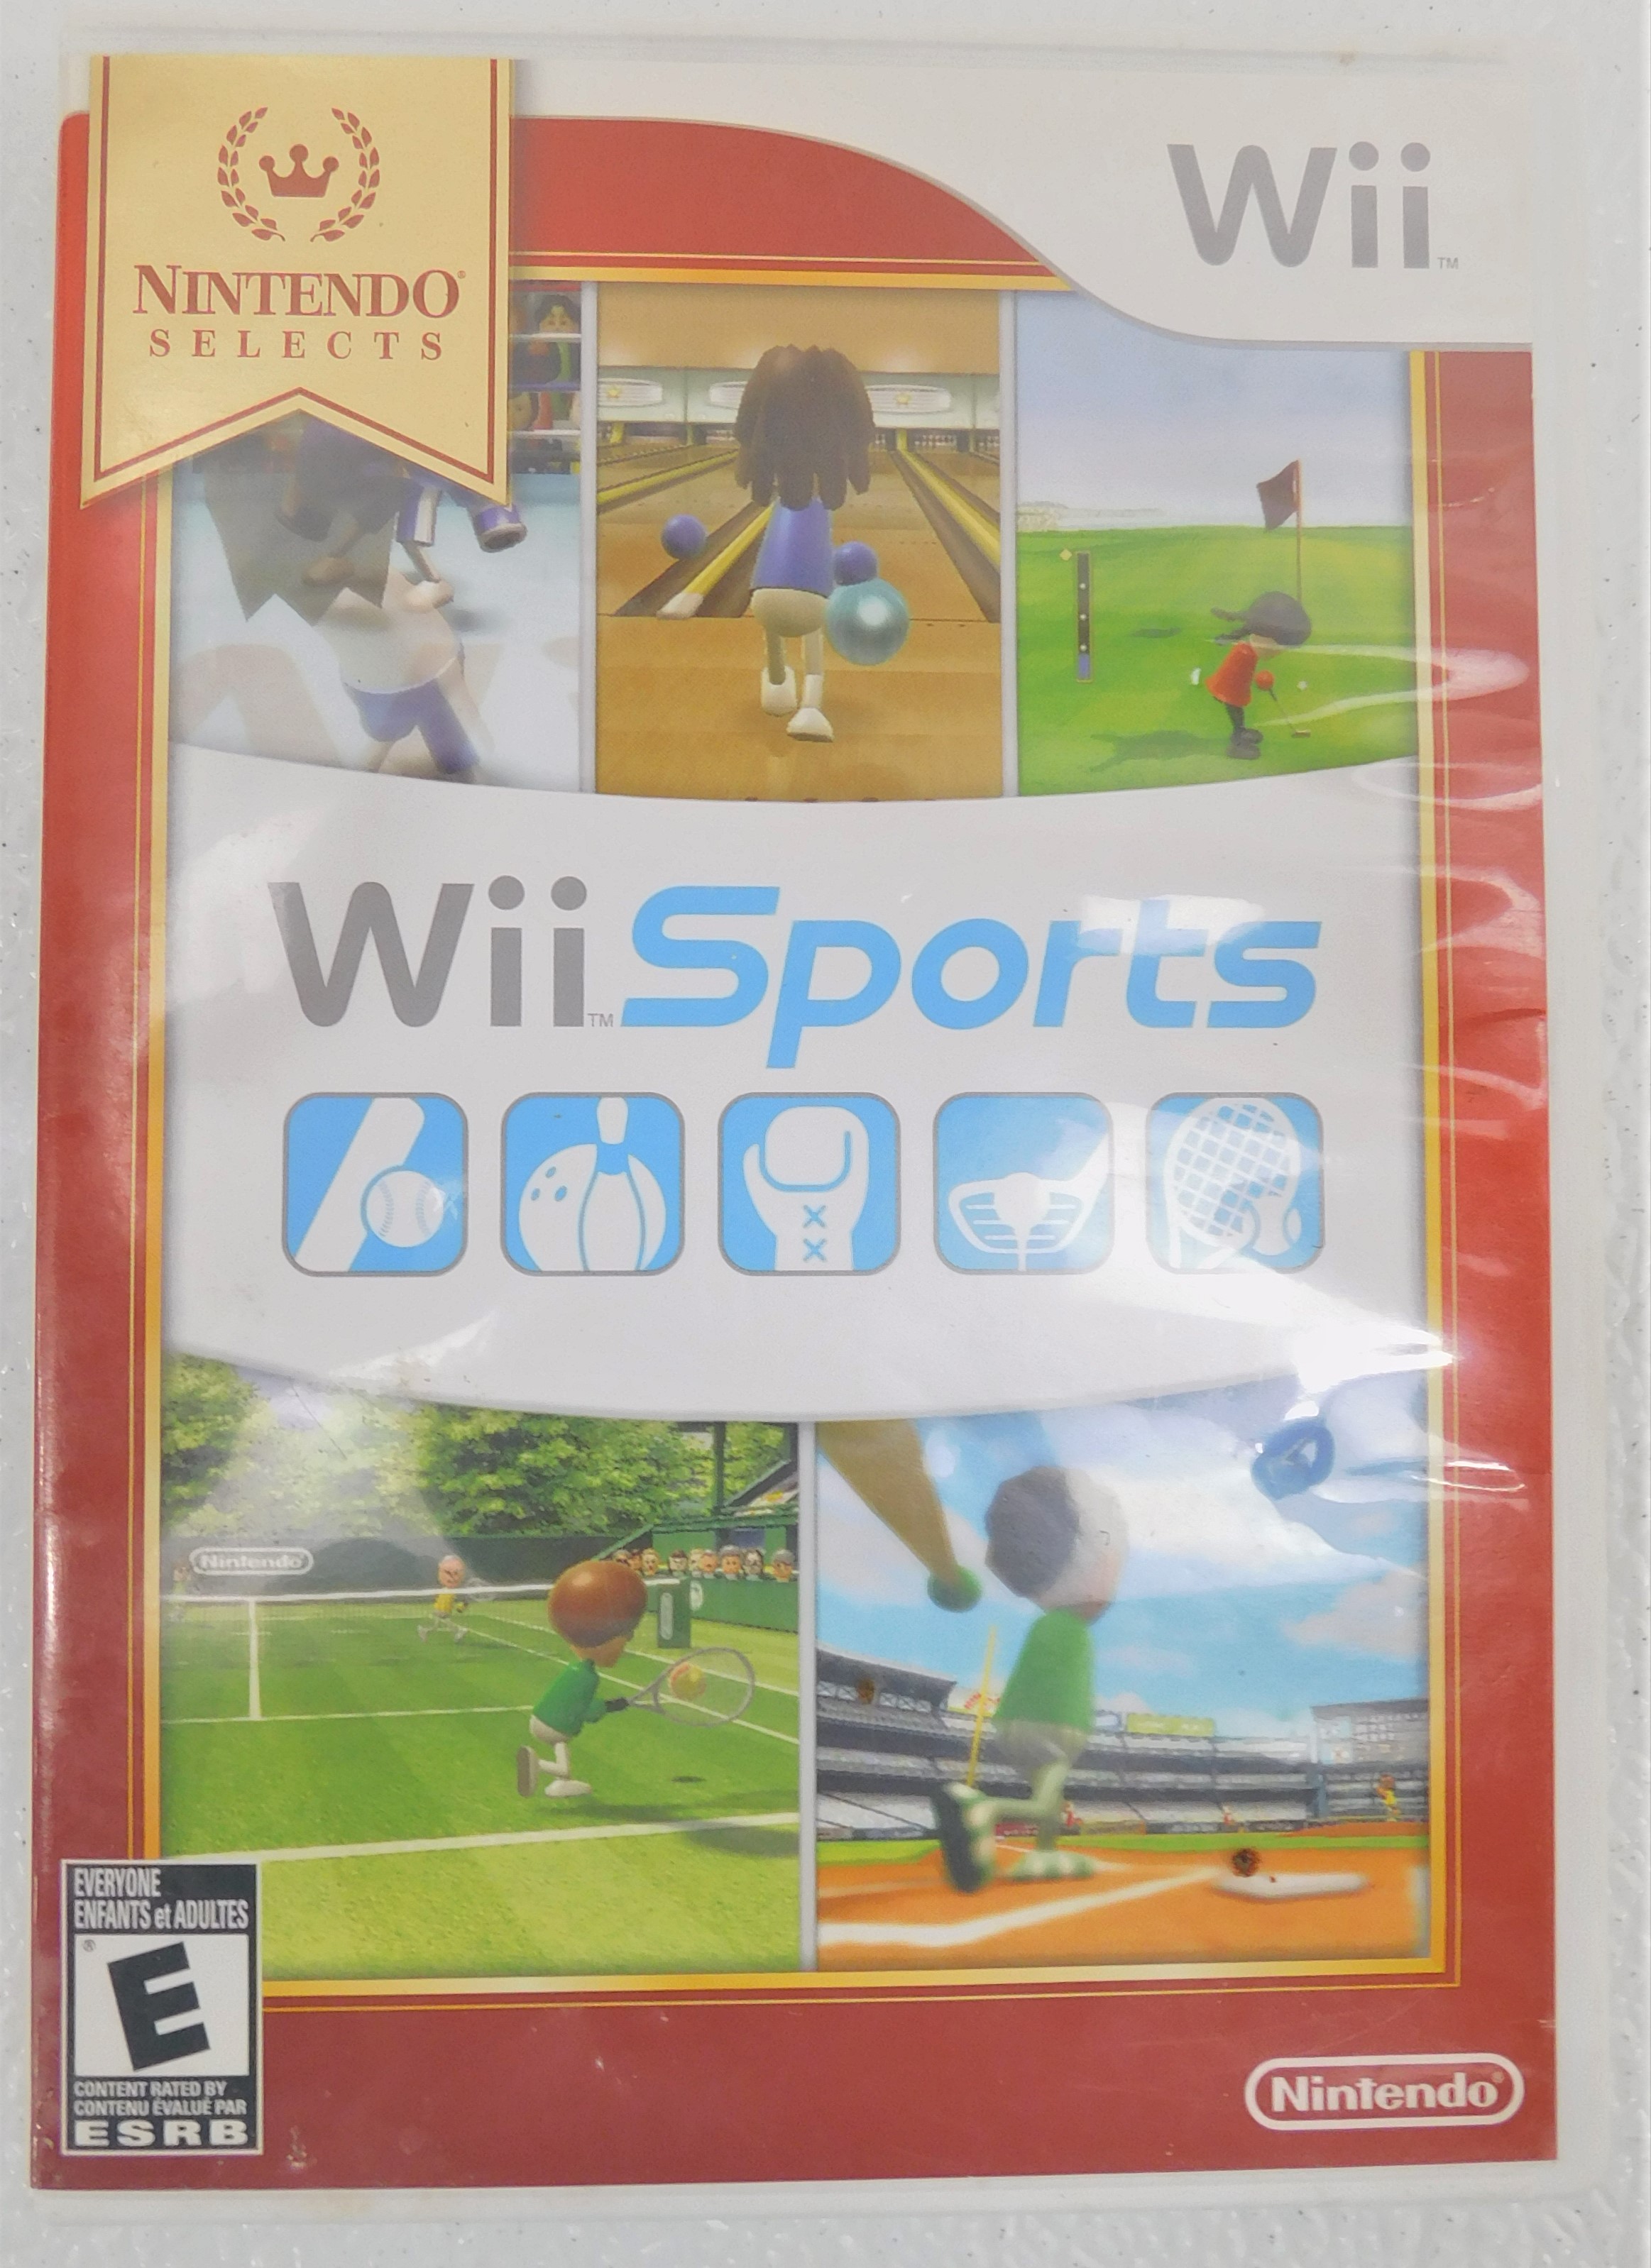 Buy The Wii Sports Nintendo Selects Nintendo Wii Cib Goodwillfinds 4350